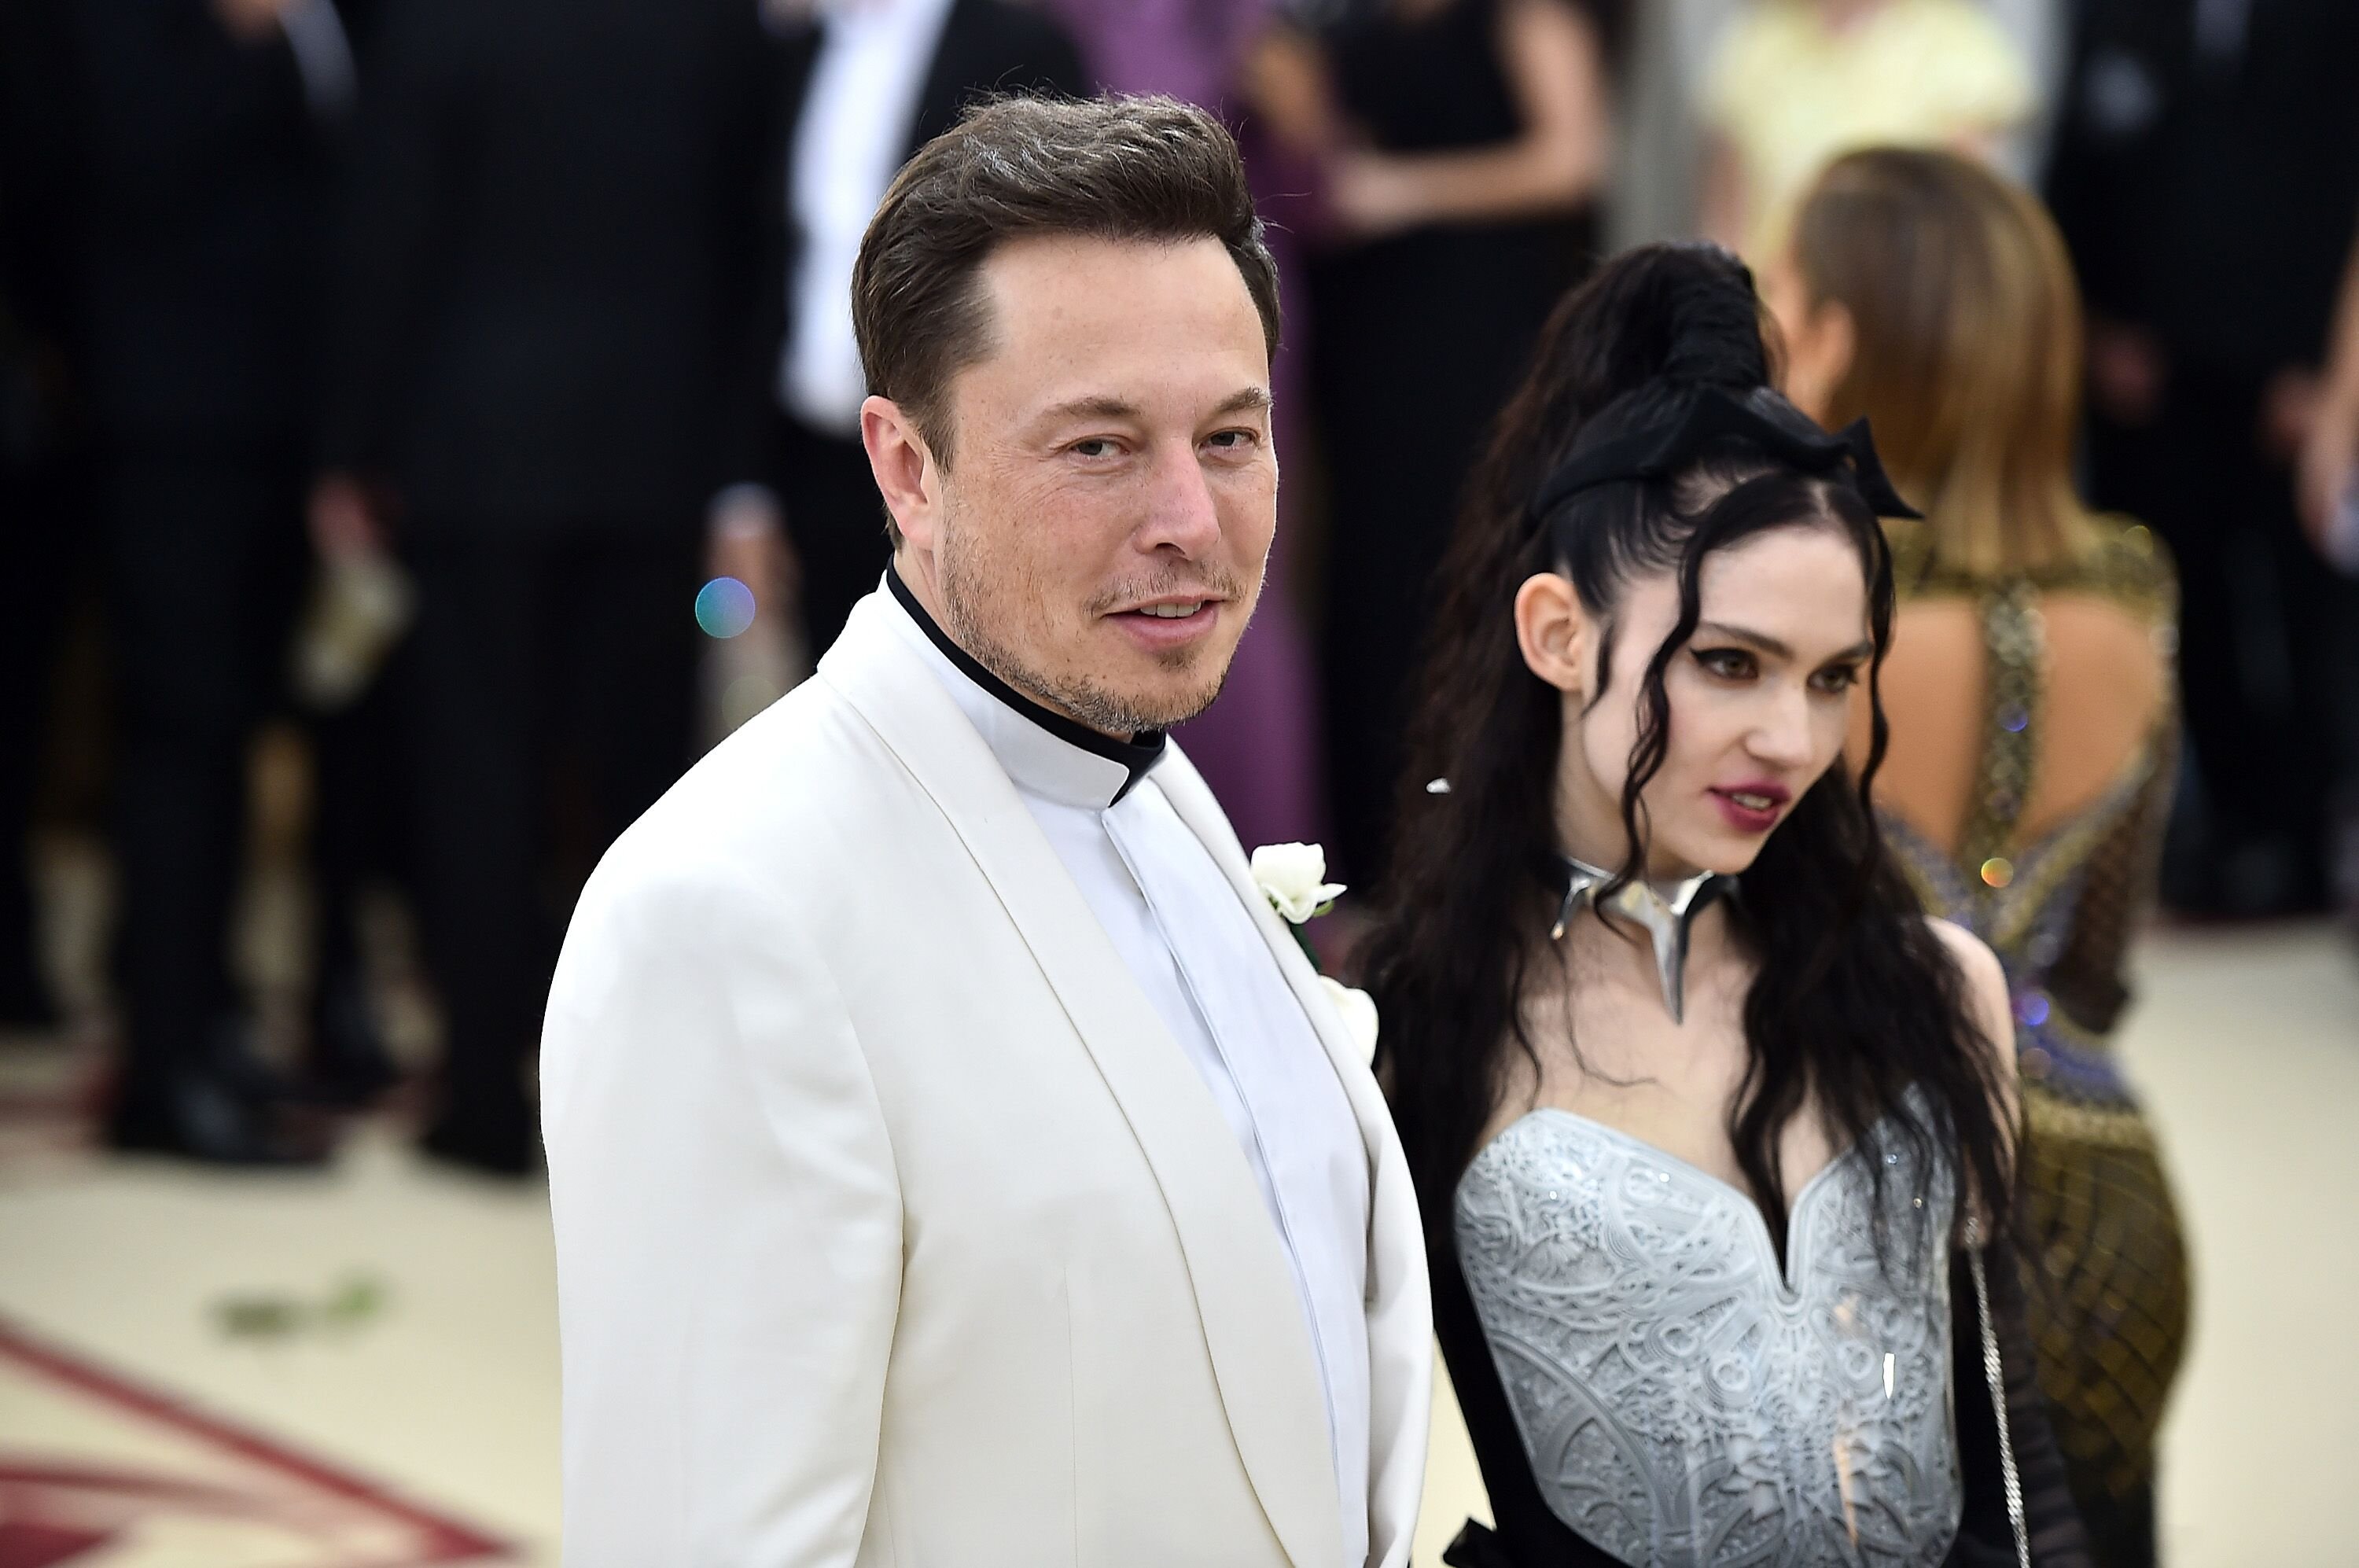 Elon Musk and Grimes attend a fashion show at The Metropolitan Museum of Art on May 7, 2018 in New York City. | Photo: Getty Images